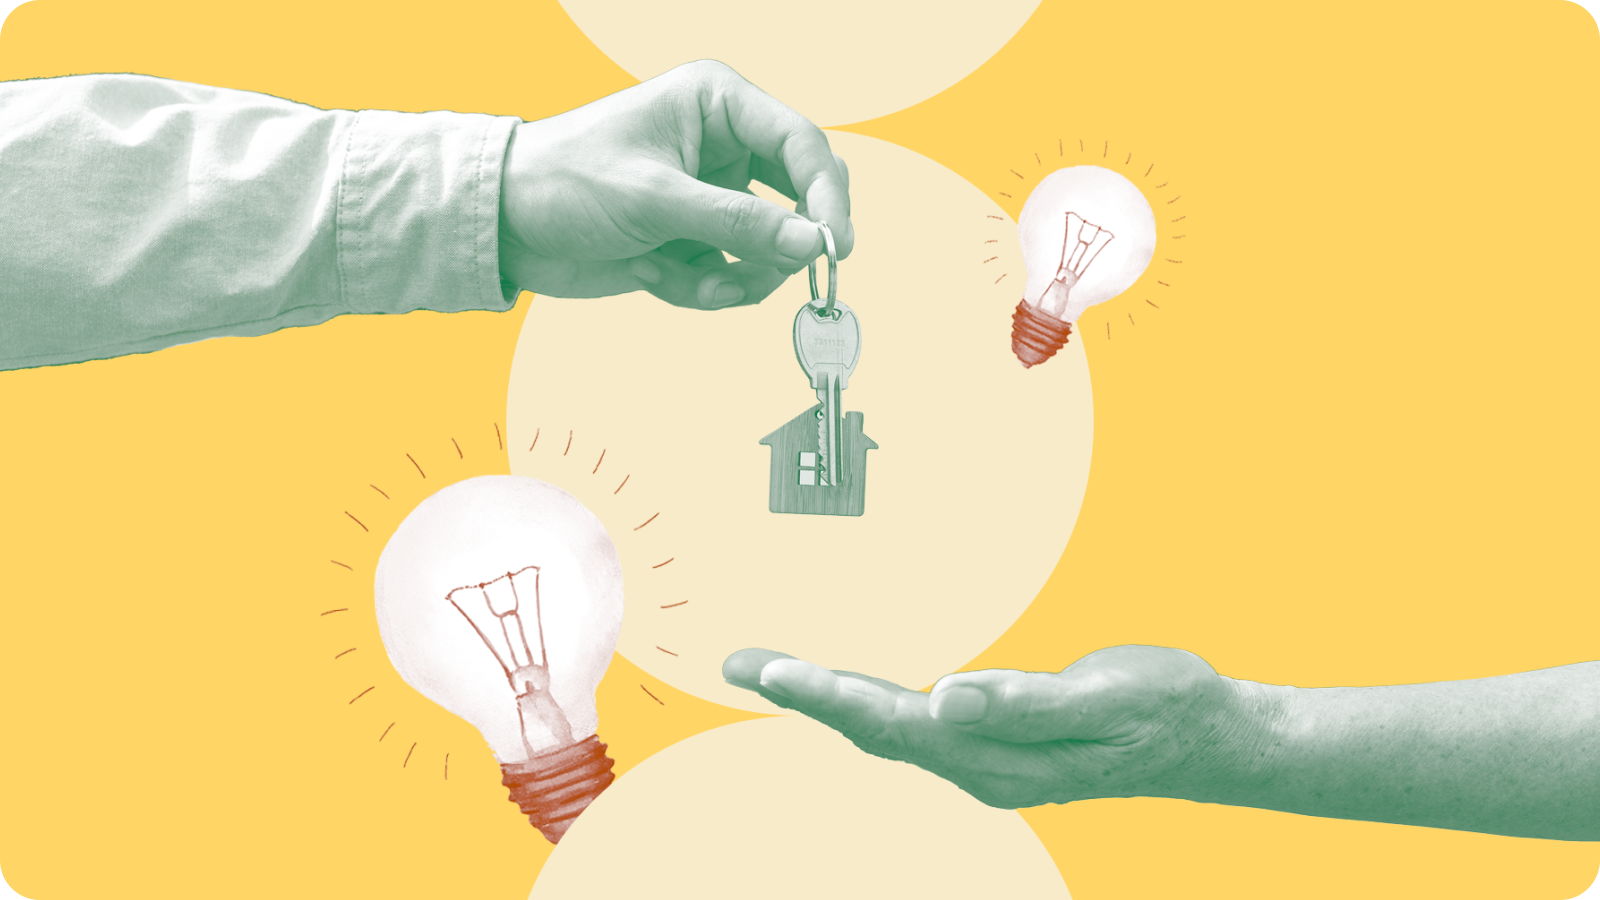 "Illustration of key in hand with lightbulbs